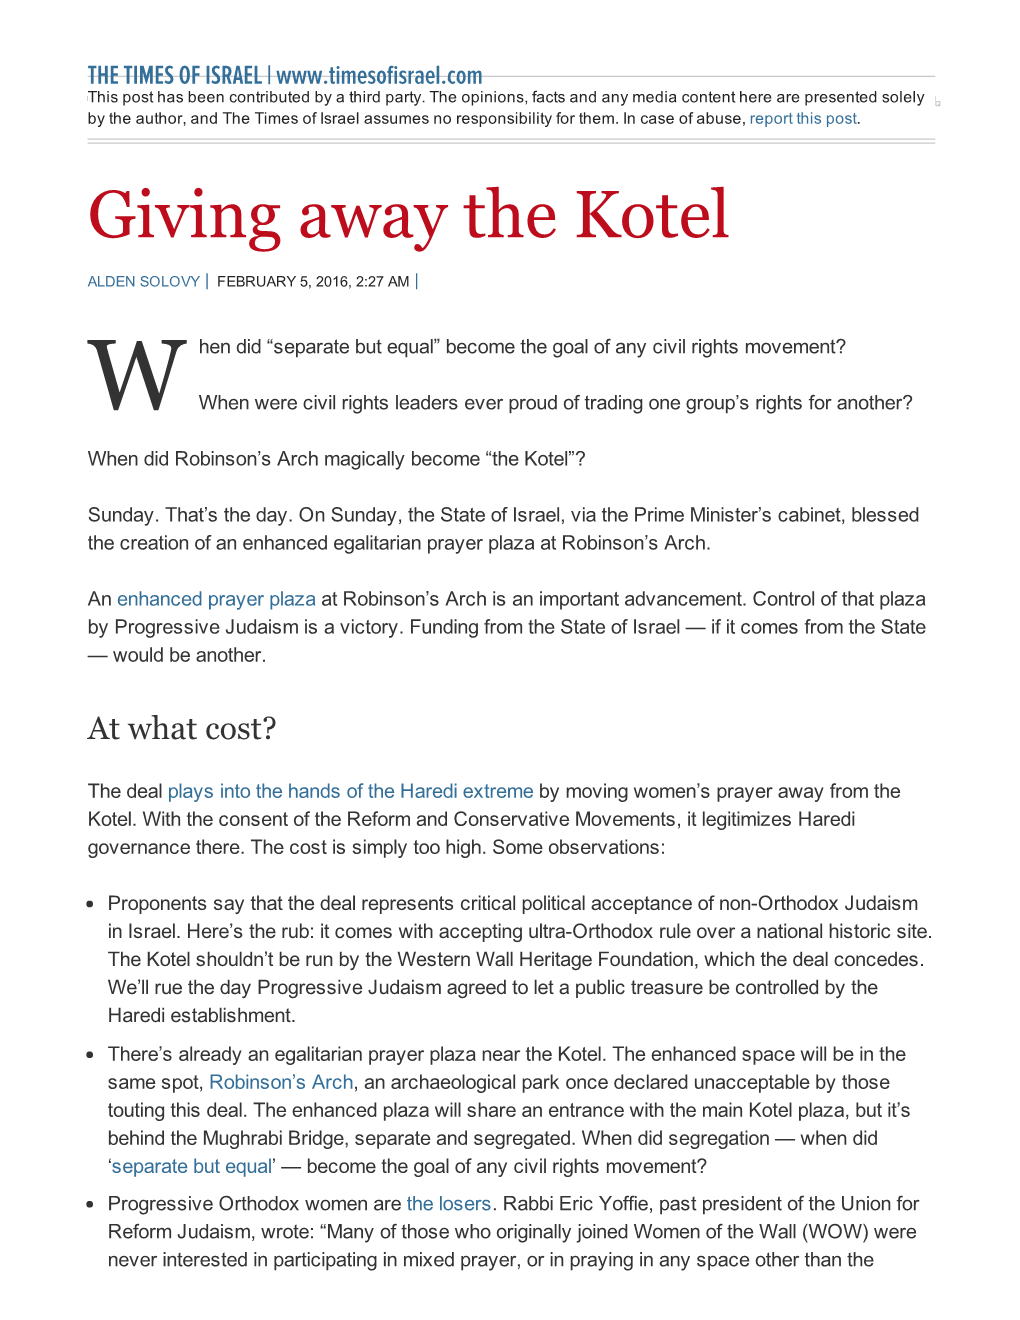 Giving Away the Kotel